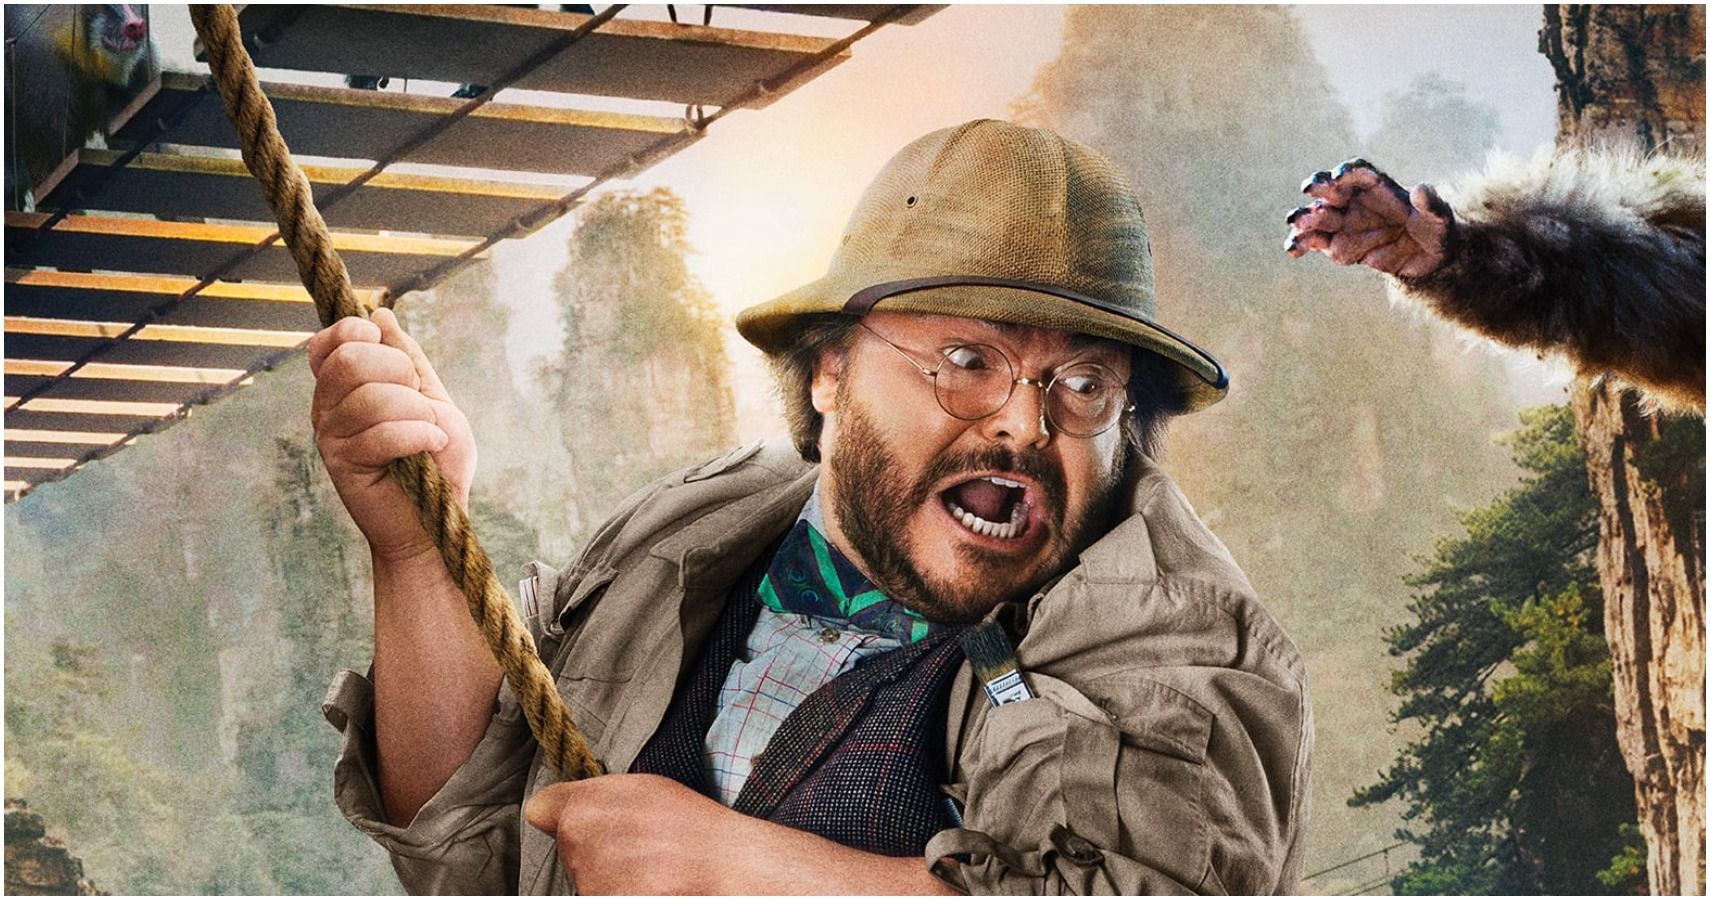 A screenshot of the promotional poster featuring Shelly Oberon from Jumanji: The Next Level